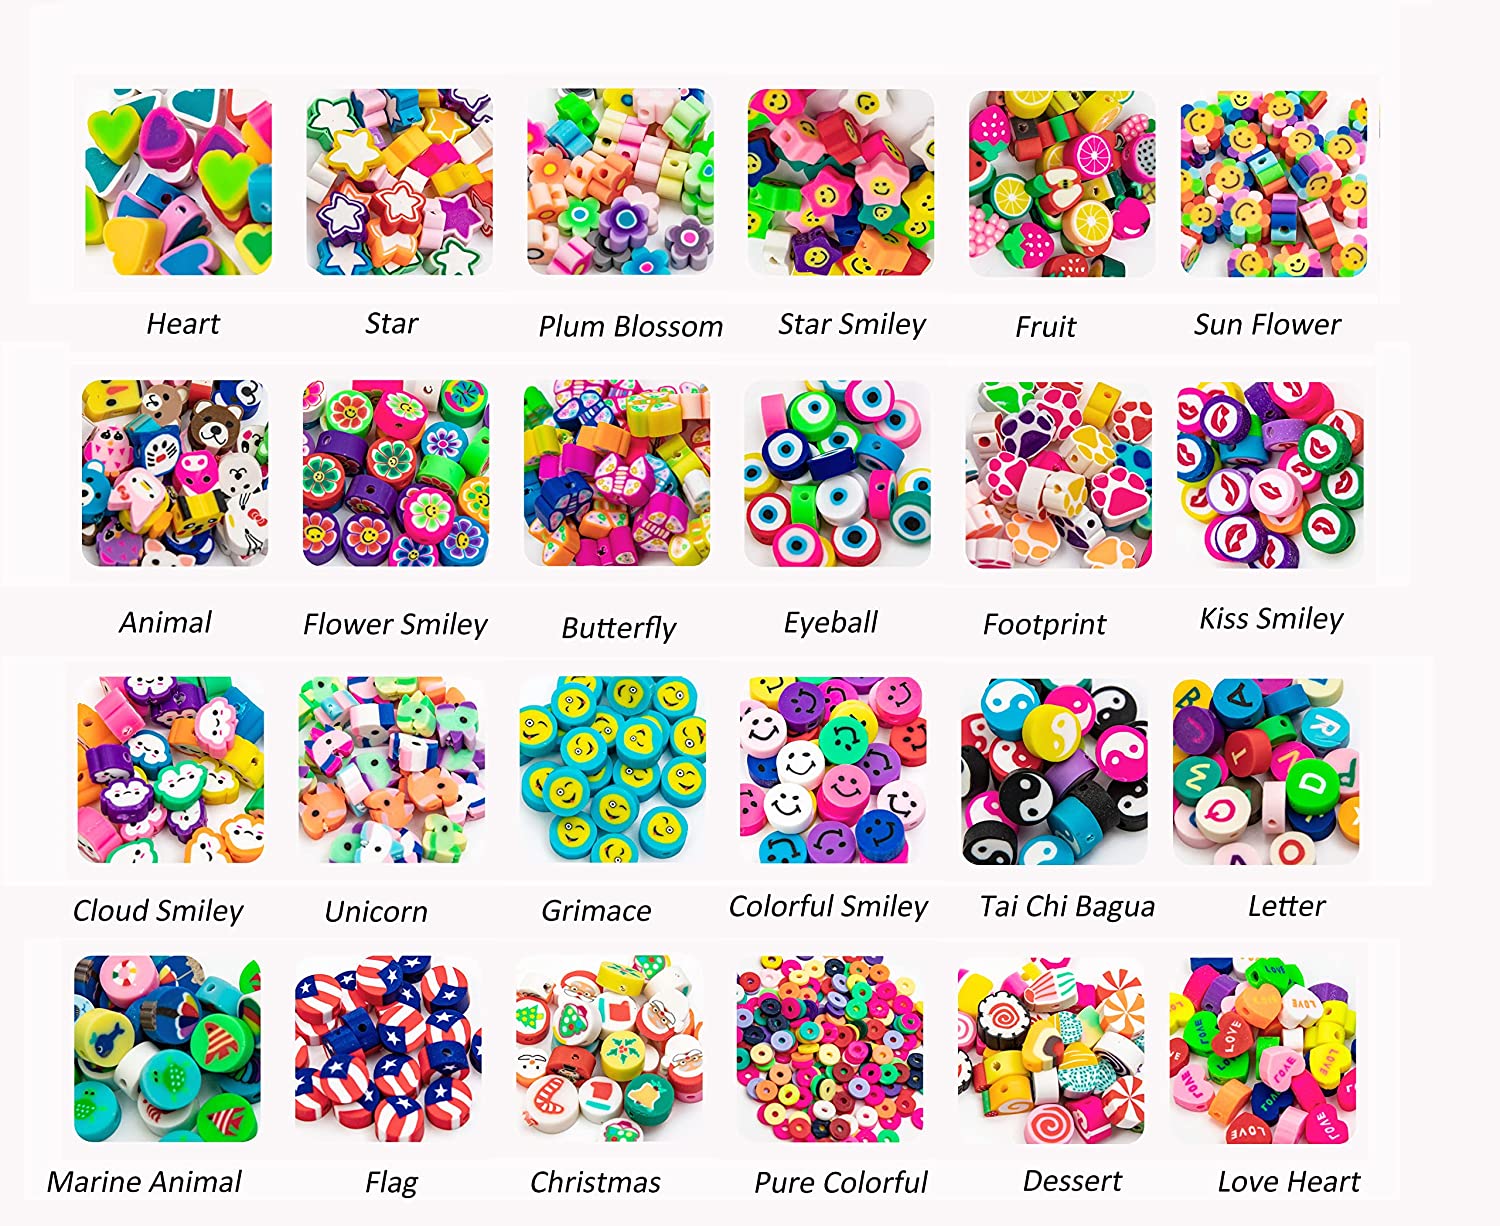 Fruit Beads for Bracelets, Polymer Clay Beads, Cute Beads, Fruit Beads  Necklace, DIY Beads Kit, 10mm Beads 